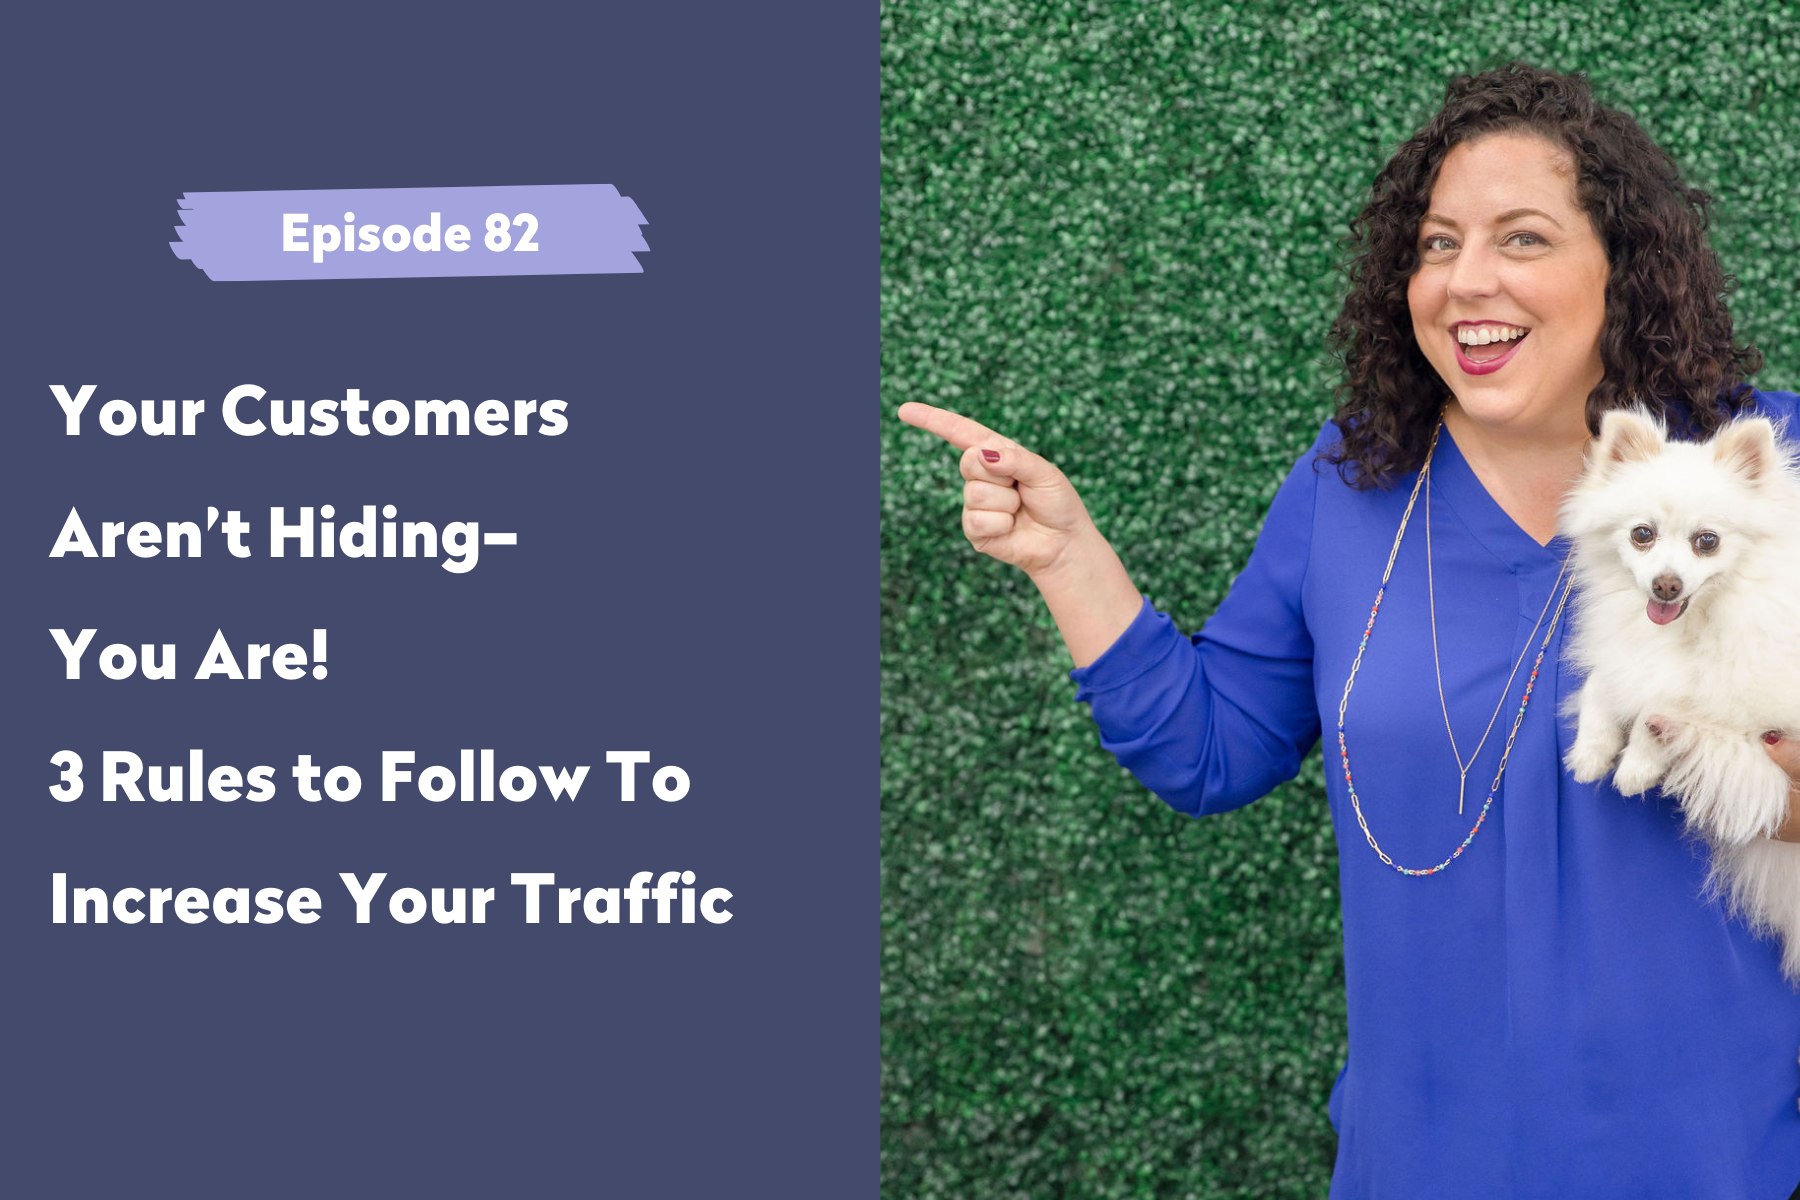 Episode 82 | Your Customers Aren’t Hiding– You Are! 3 Rules to Follow To Increase Your Traffic.